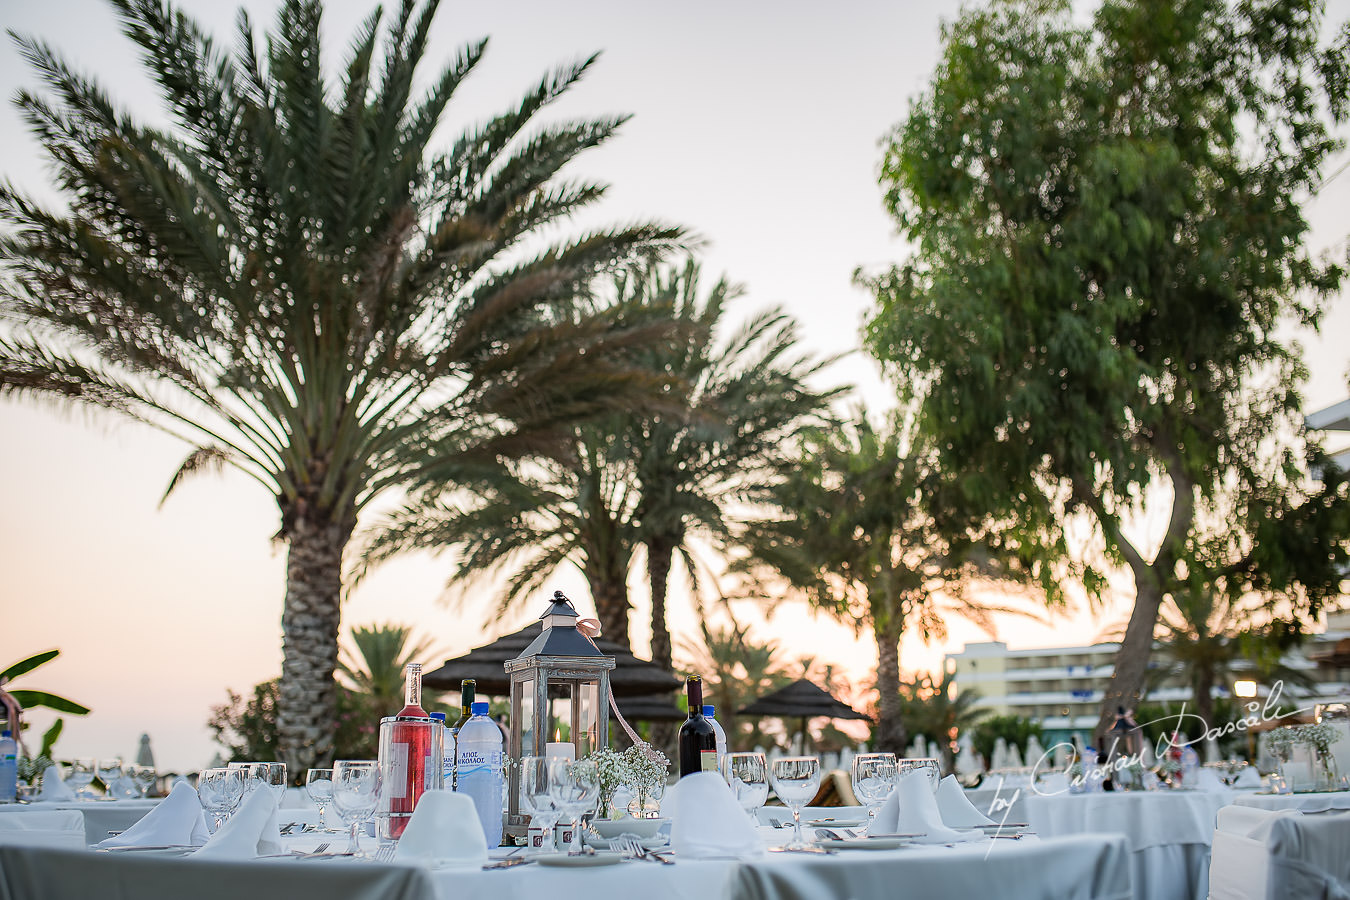 Moments photographed by Cristian Dascalu at Athena Beach Hotel in Paphos, Cyprus, during a symbolic wedding.